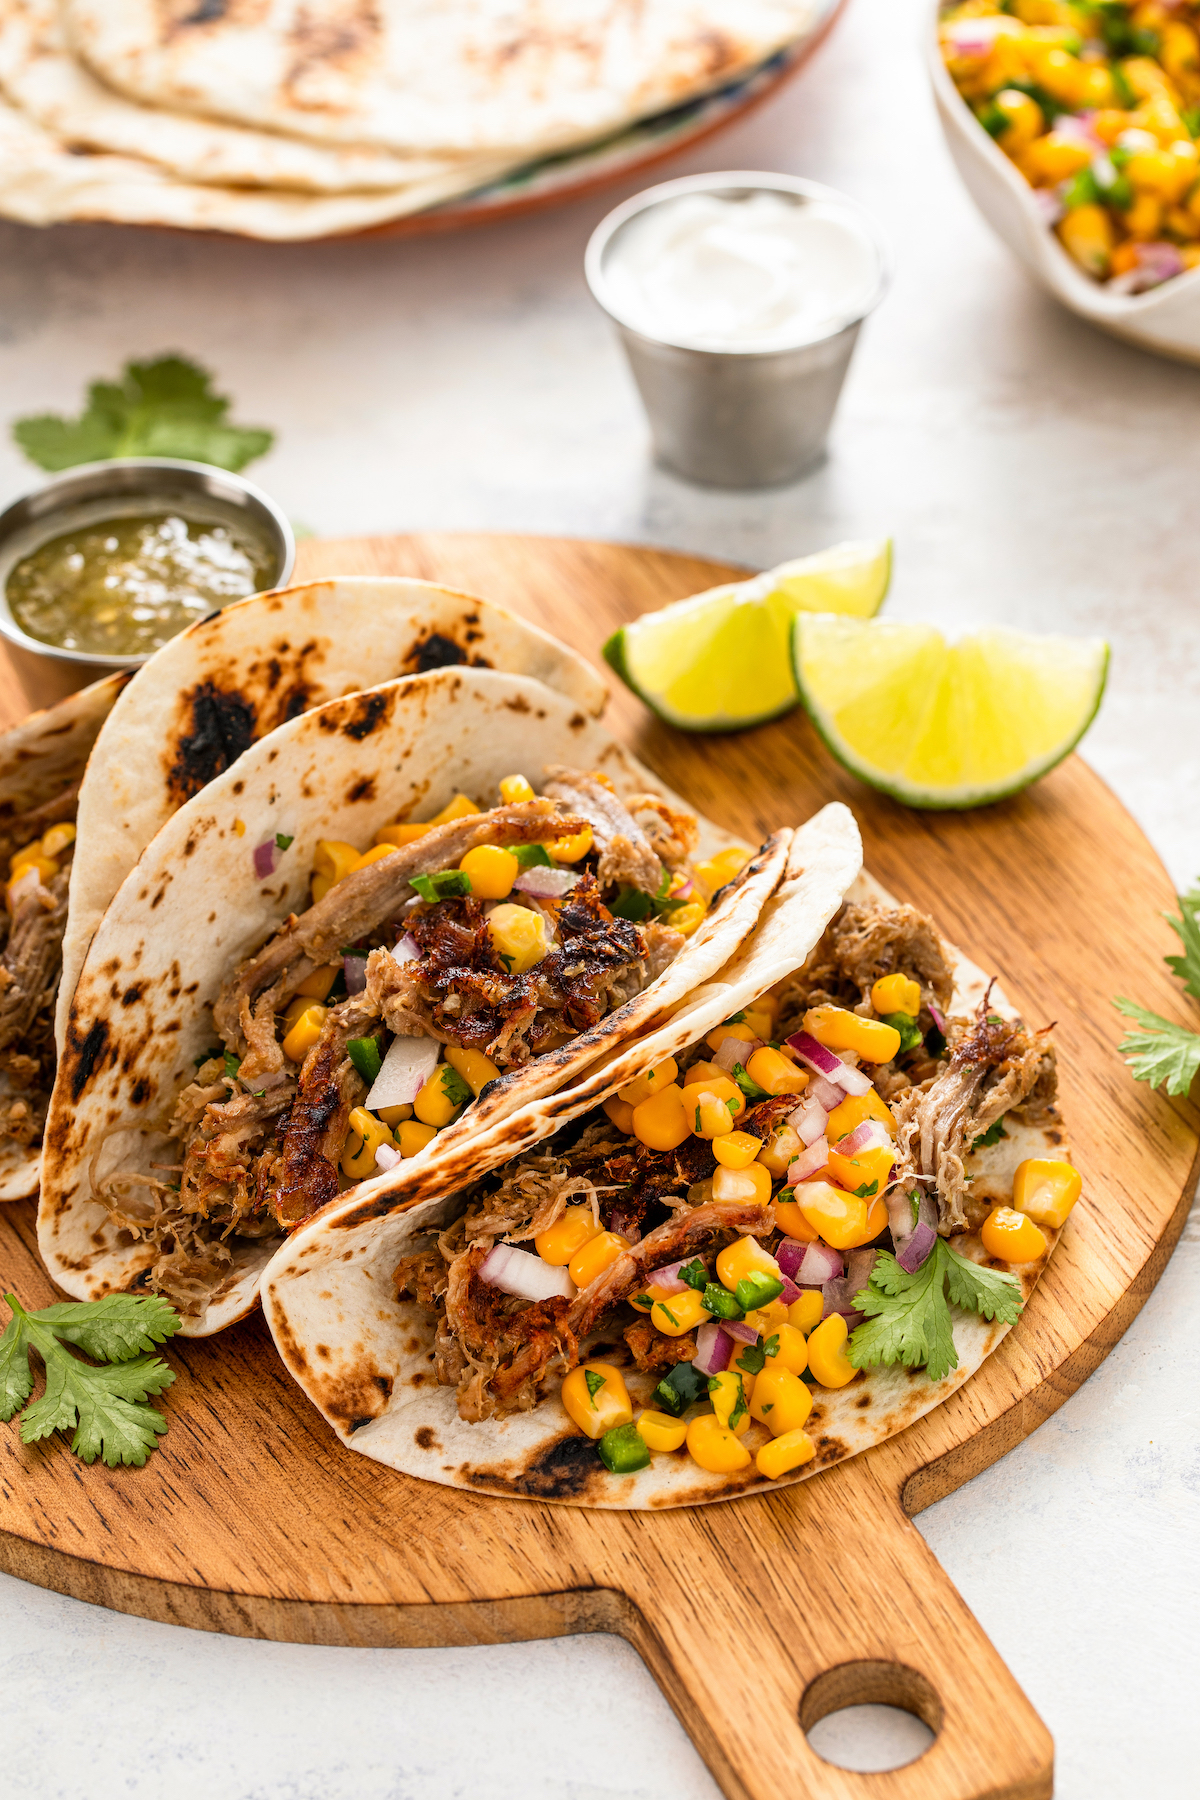 Juicy and crispy crock pot carnitas served in flour tortillas and topped with fresh corn salsa.